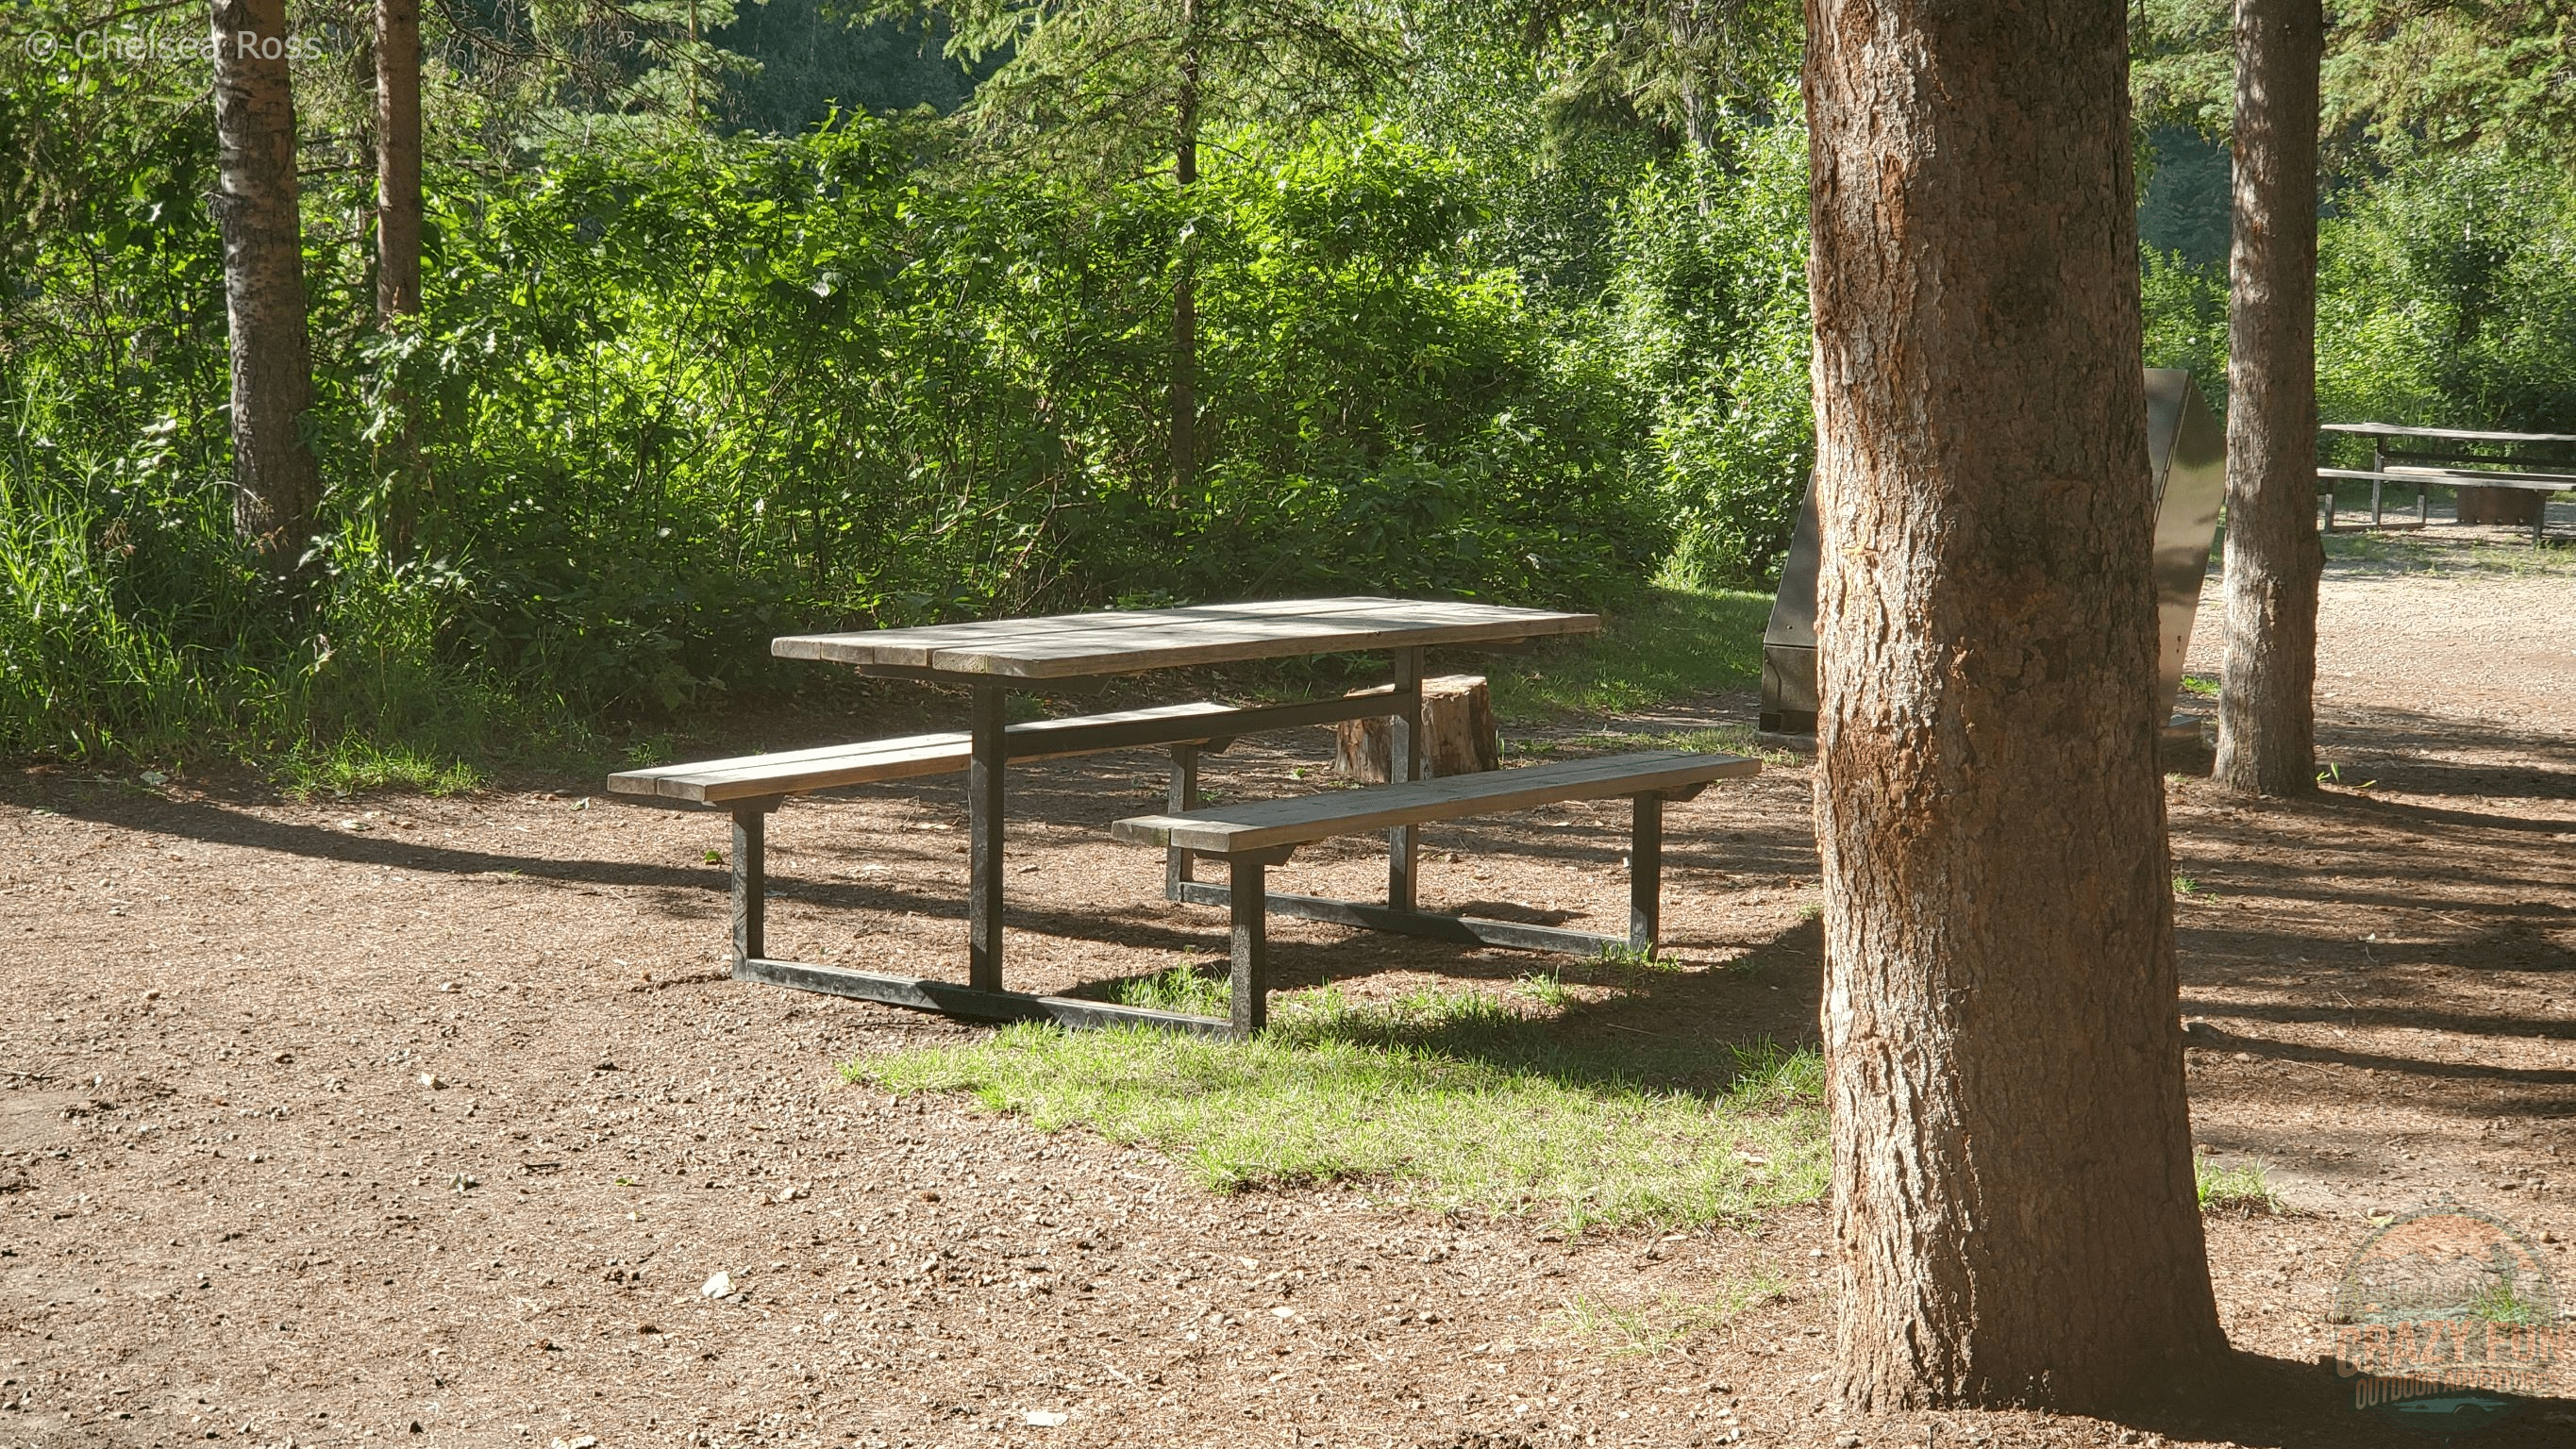 A picnic table in the shade surrounded by trees on gravel.